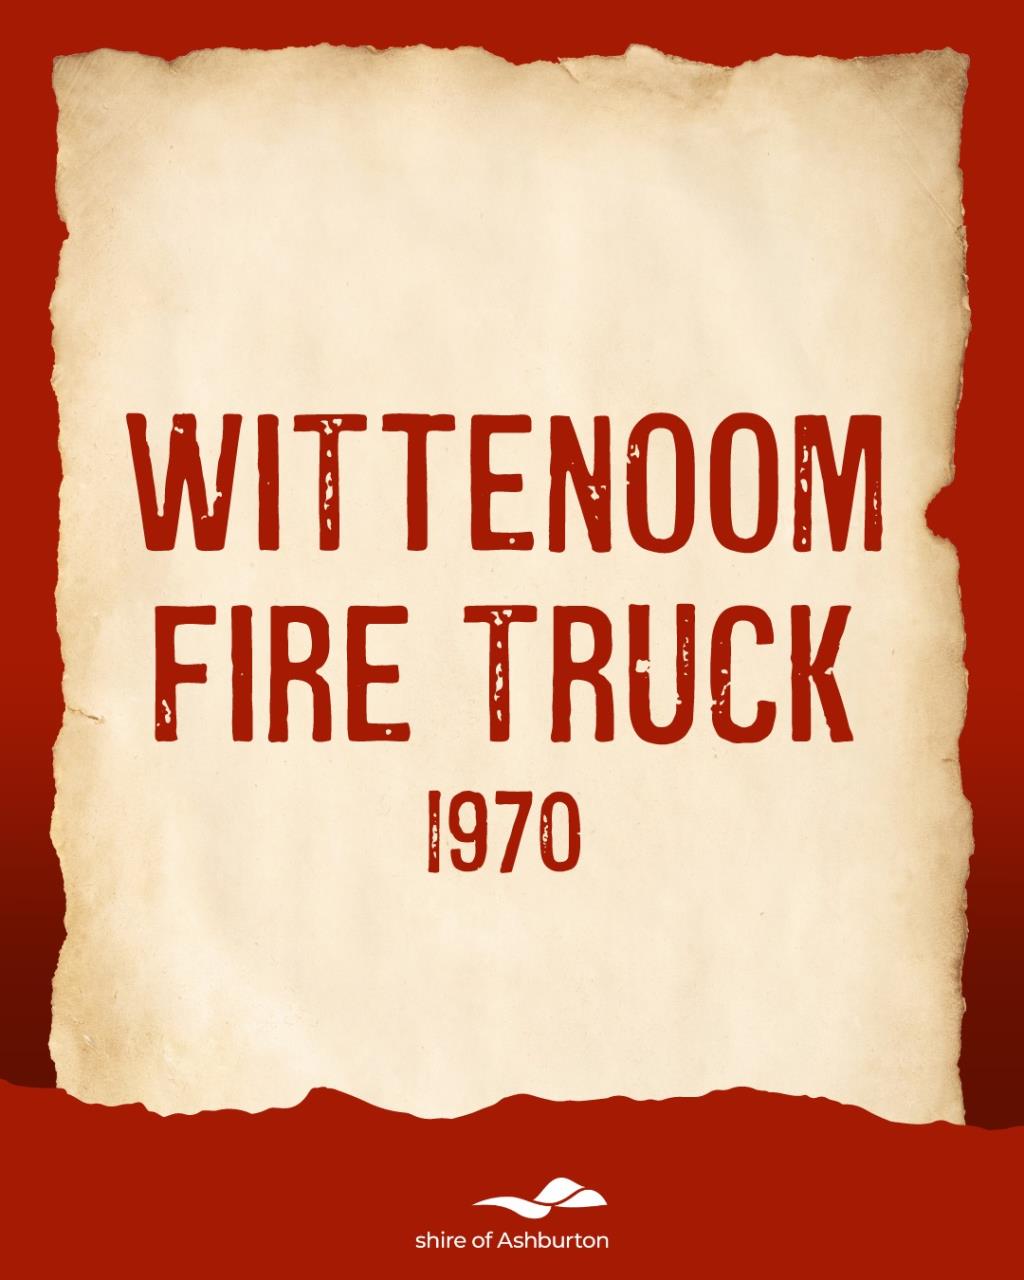 Introducing the Wittenoom Fire Truck Restoration!